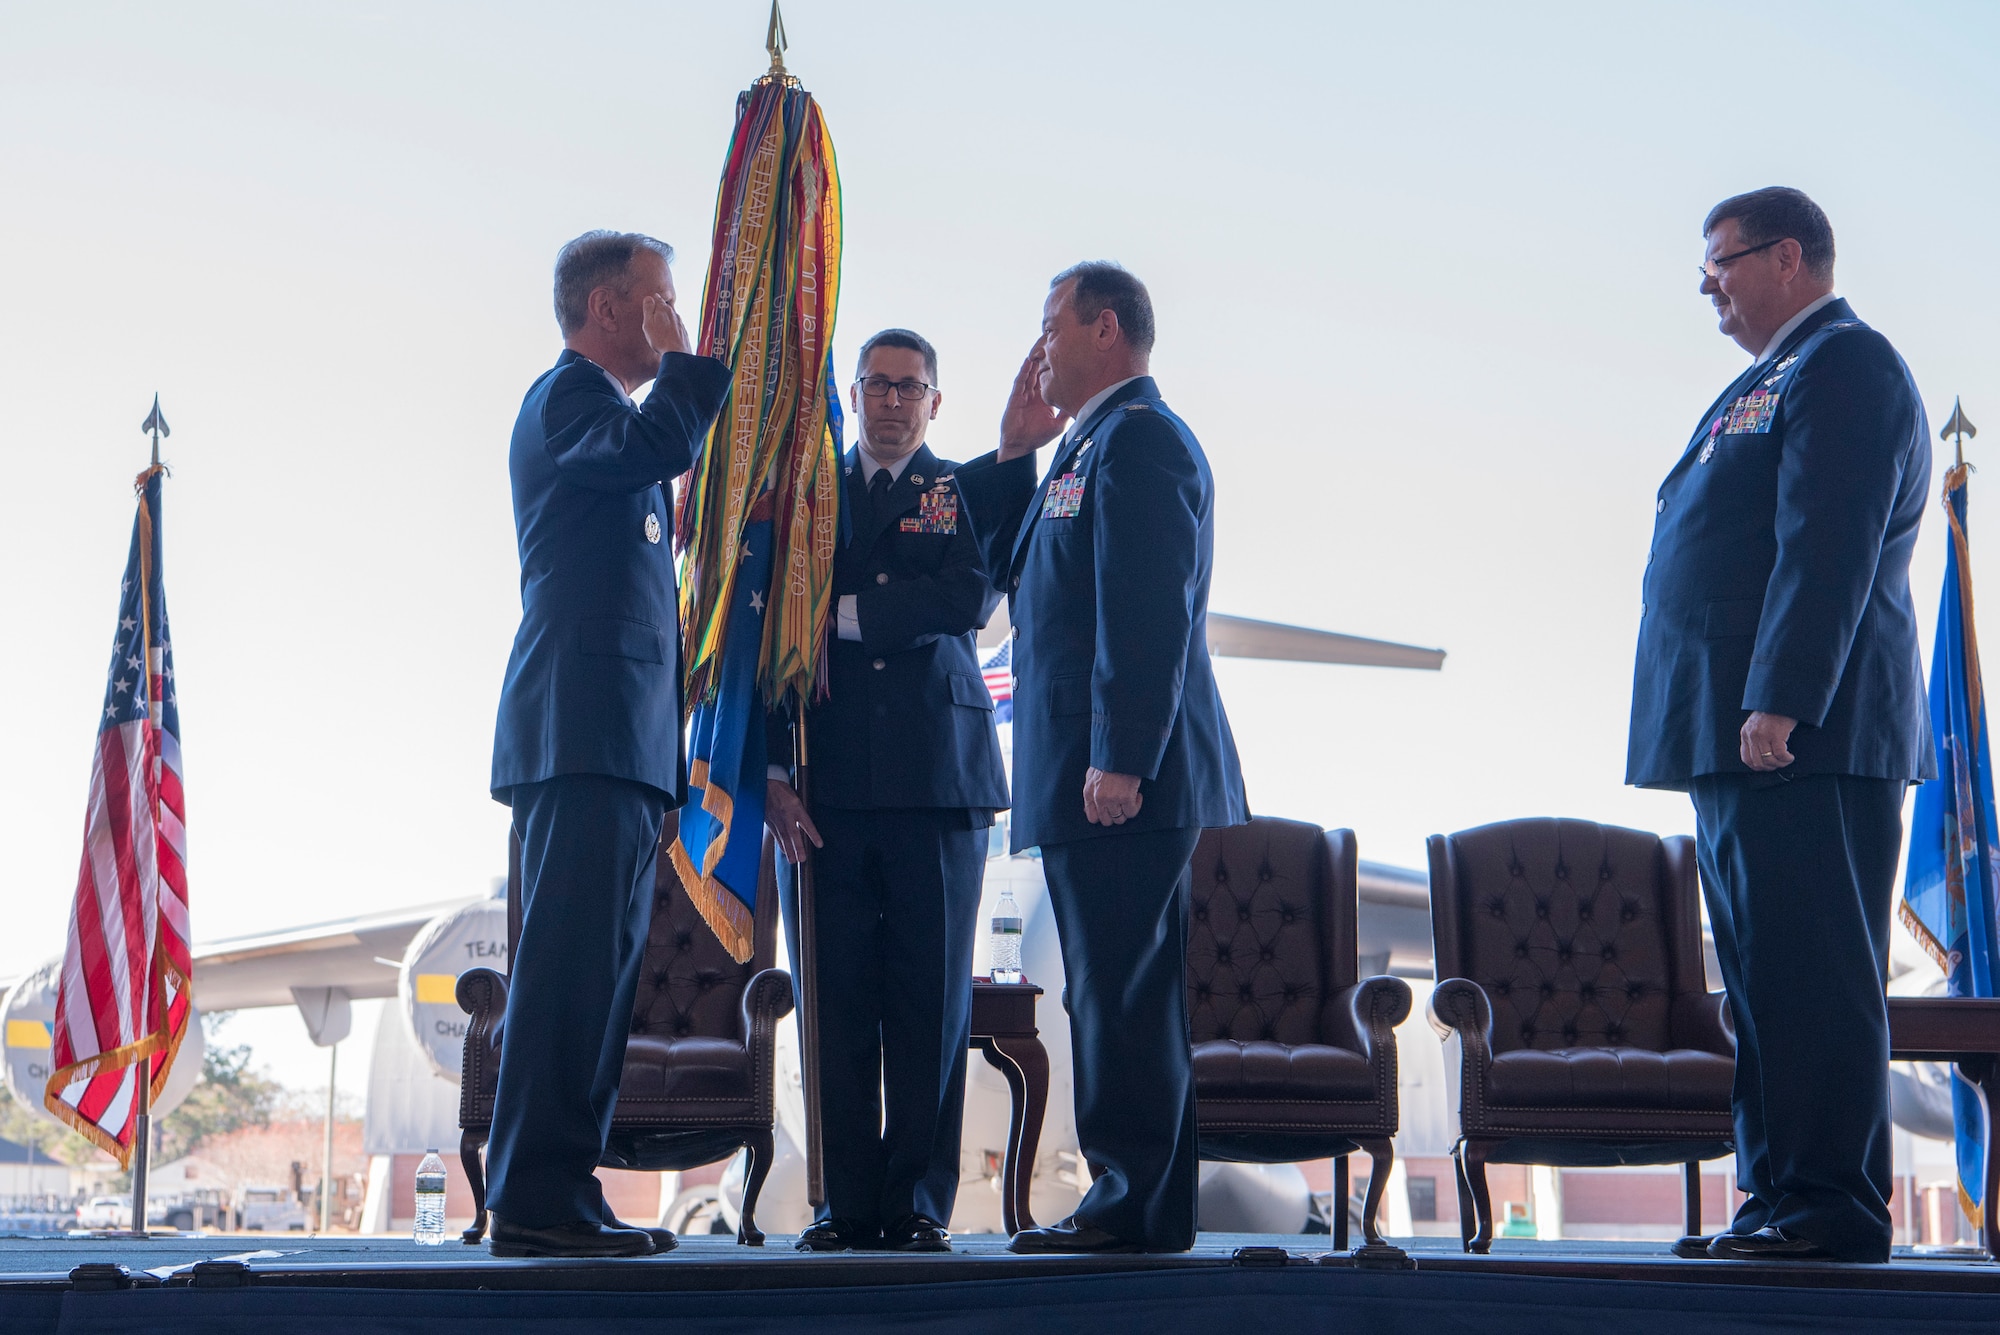 Col. Adam Willis, middle, incoming 315th Airlift Wing commander, takes command during a change of command ceremony officiated by Maj. Gen. Randall Ogden, left, U.S. Air Force 4th Air Force Commander, at Nose Dock 2 here, Dec. 7. Willis replaced Col. Gregory Gilmour, right, as the 315th Airlift Wing commander.